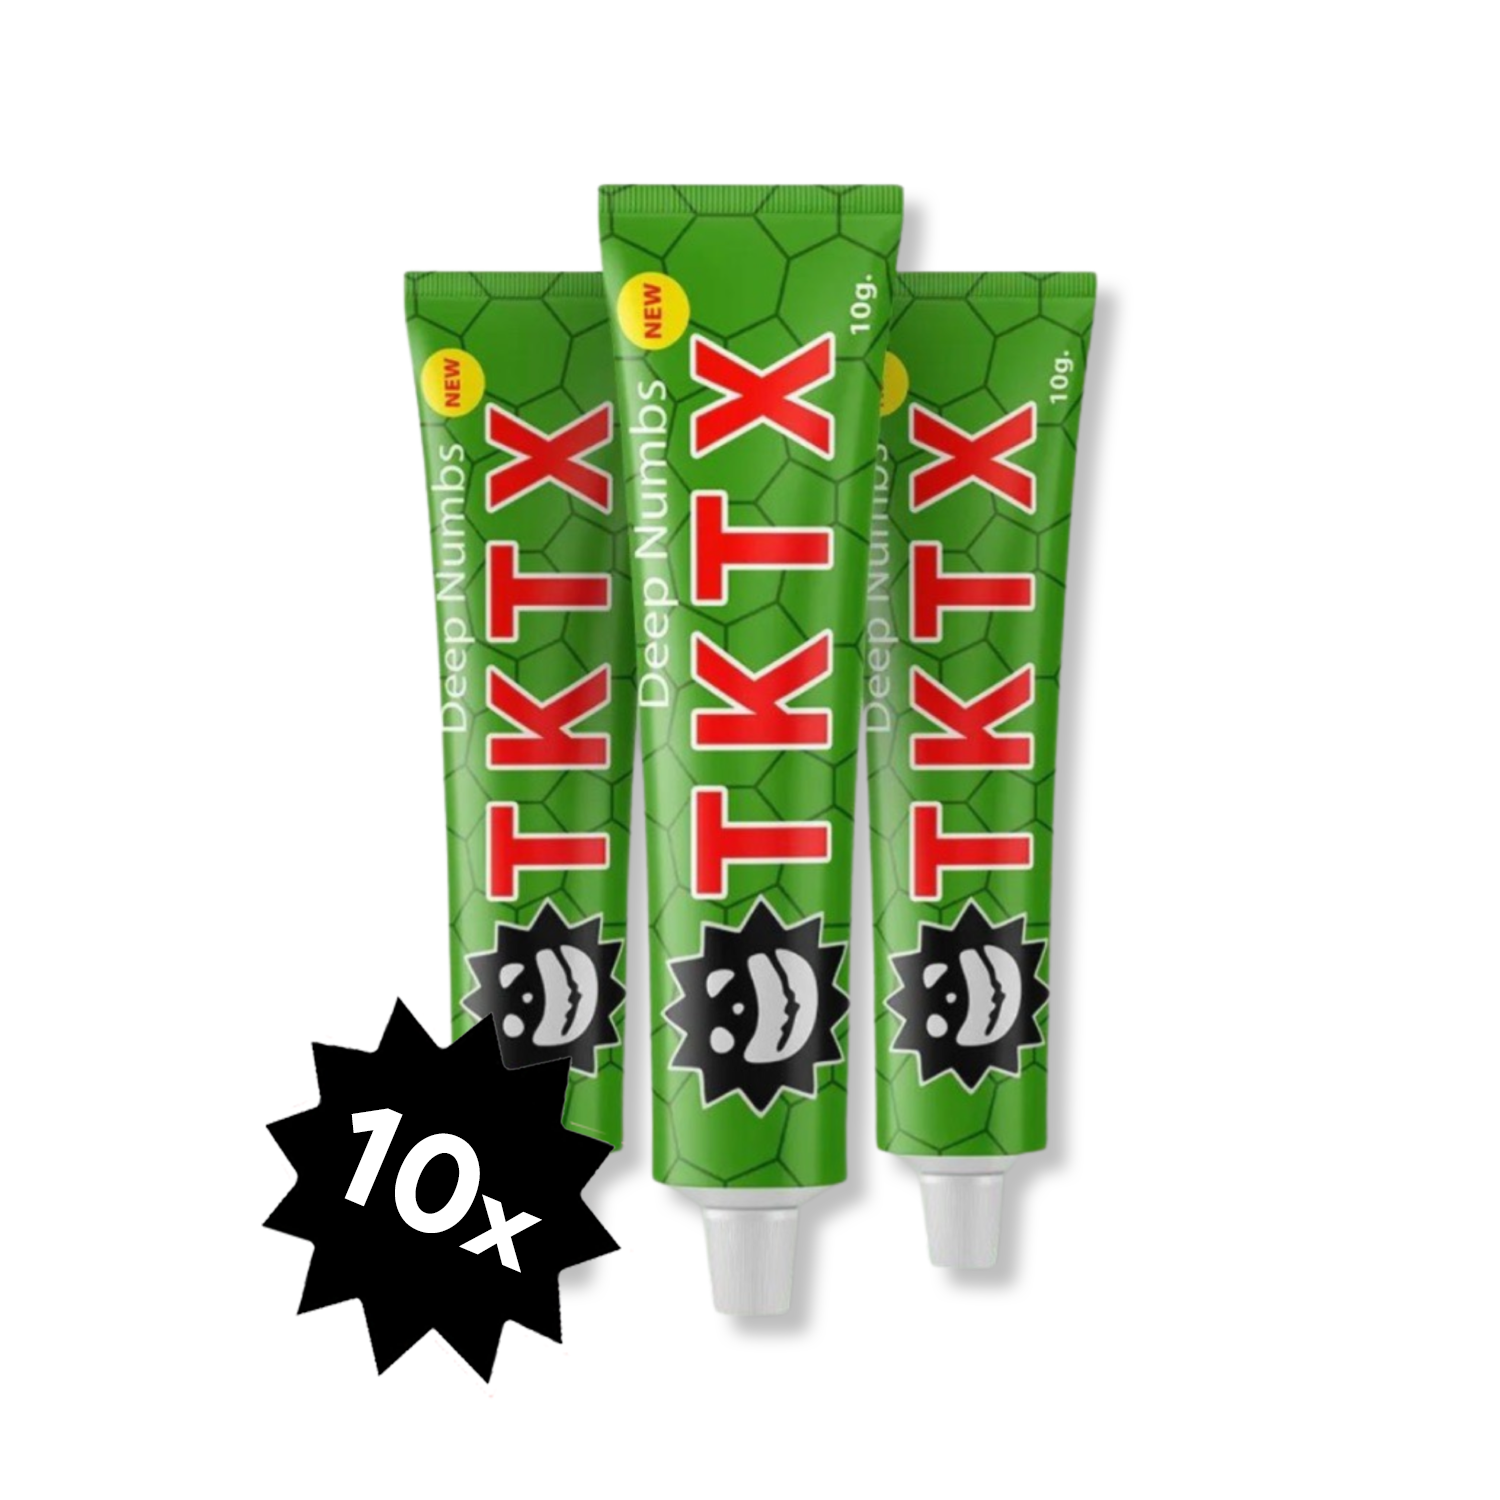 Without pain - 10x TKTX Groen